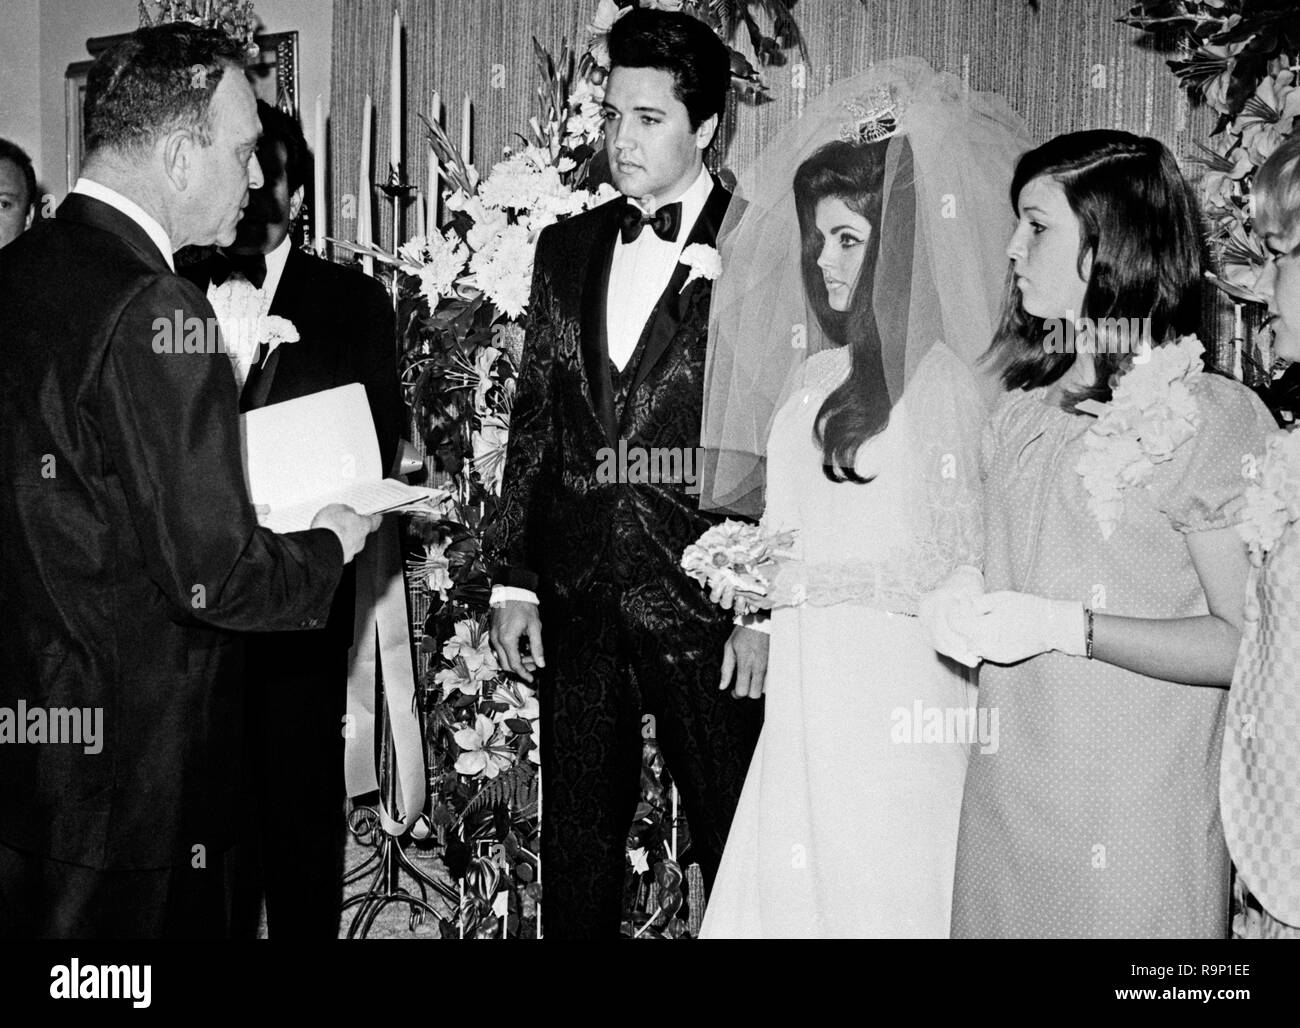 Elvis Presley, Priscilla Presley, on their wedding day, May 1, 1967, at the Aladdin  Hotel in Las Vegas, Nevada. File Reference # 33635 874CPC Stock Photo -  Alamy